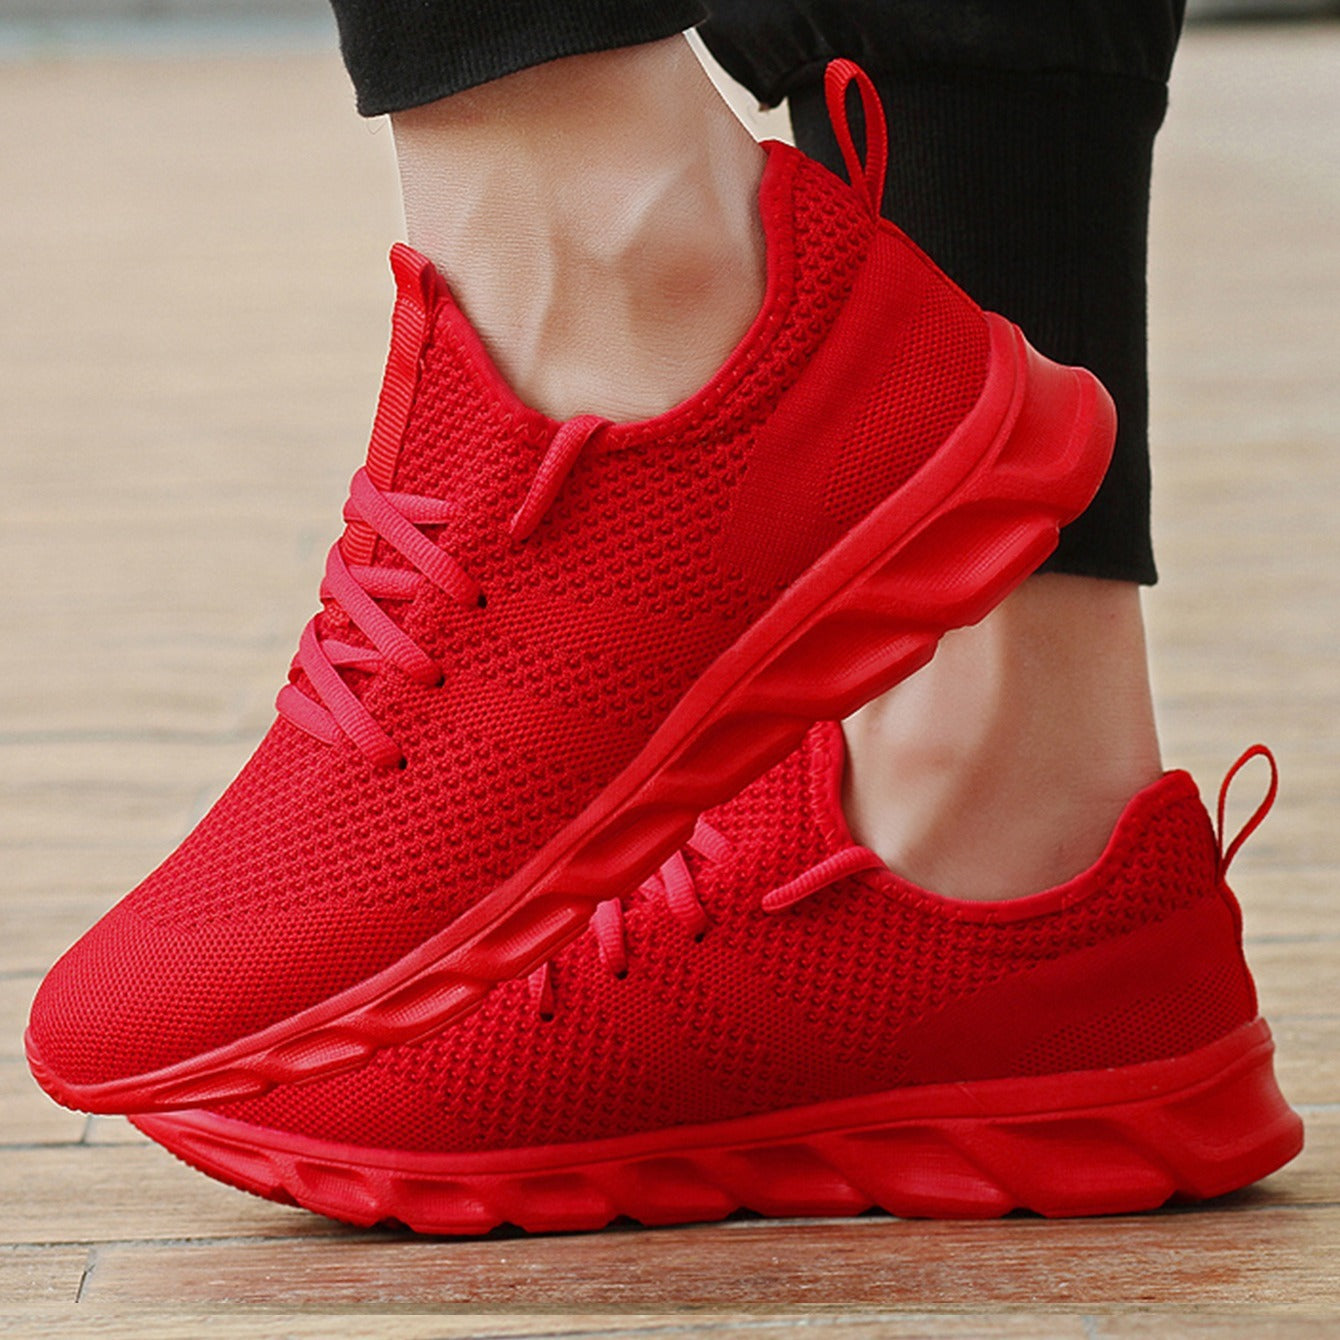 Men's Breathable Lightweight Woven Running Shoes Gift Chinese New Year Gift